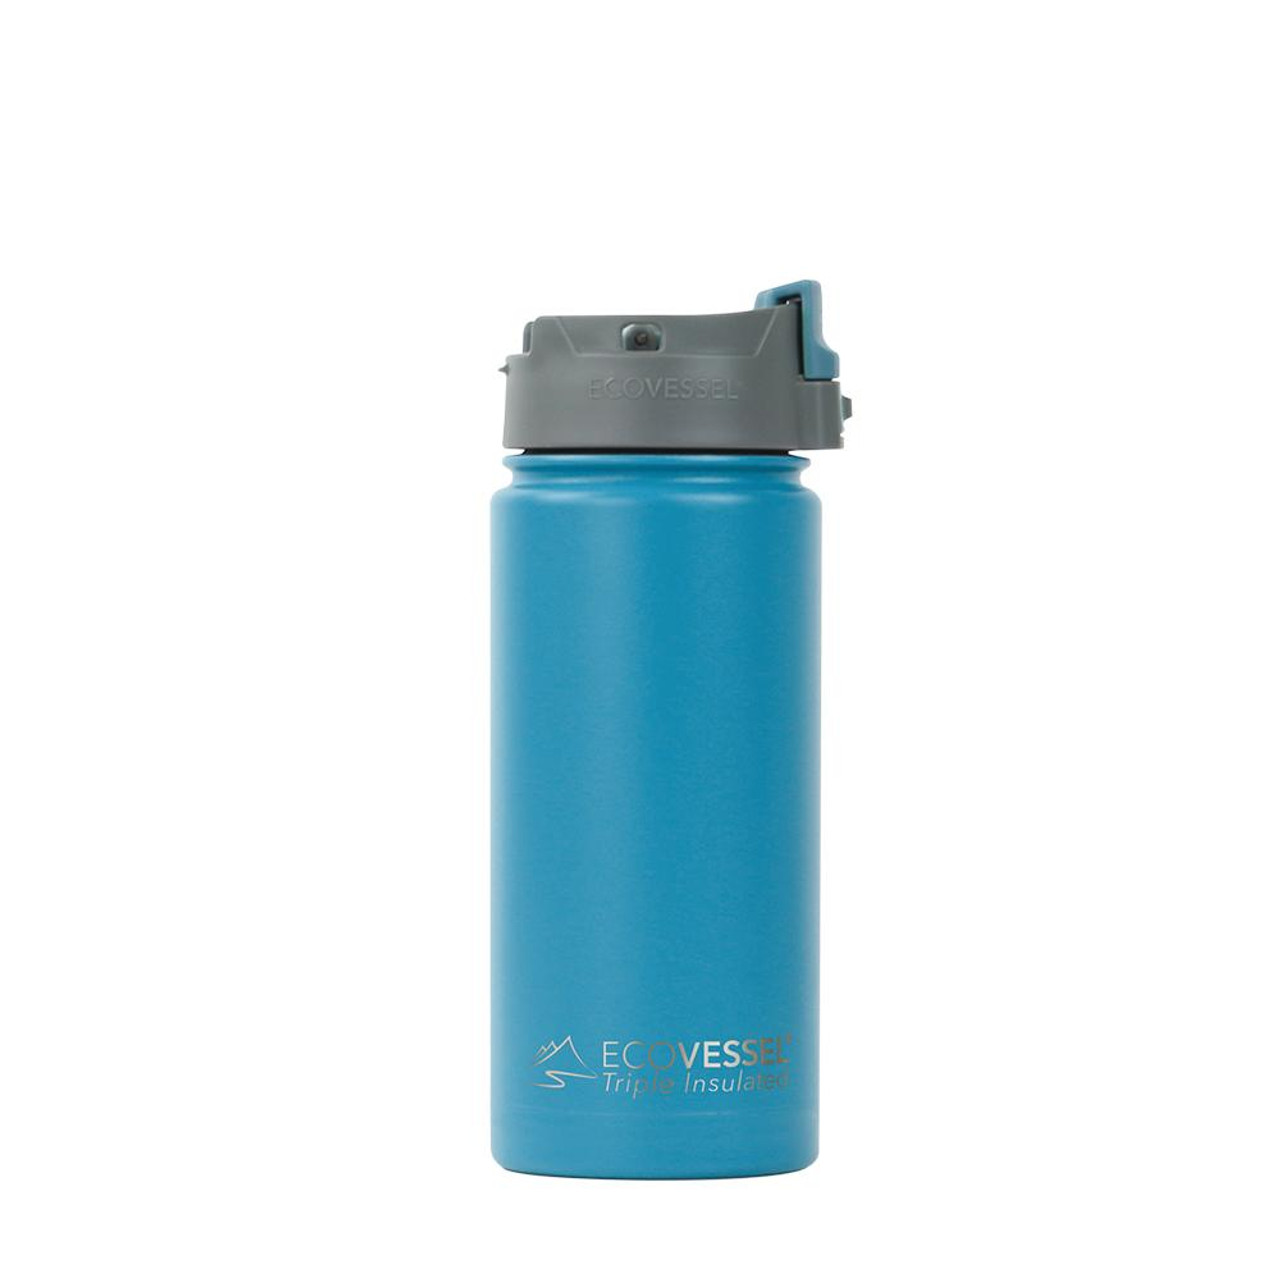 16oz EcoVessel PERK Insulated Tea and Coffee Mug Bottle Silver